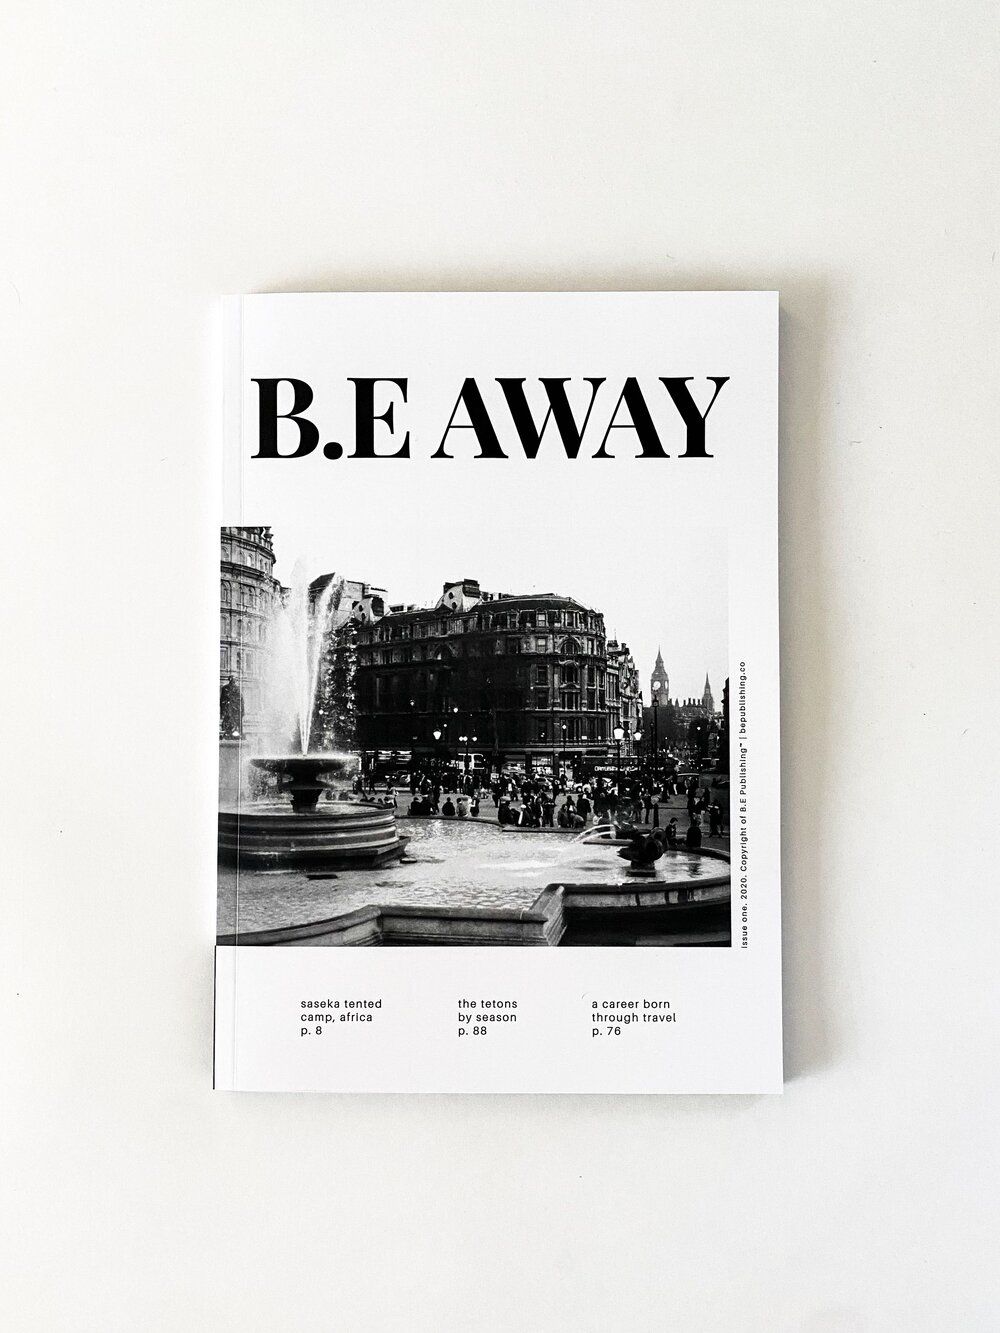 *SOLD OUT* B.E Away Issue One Print